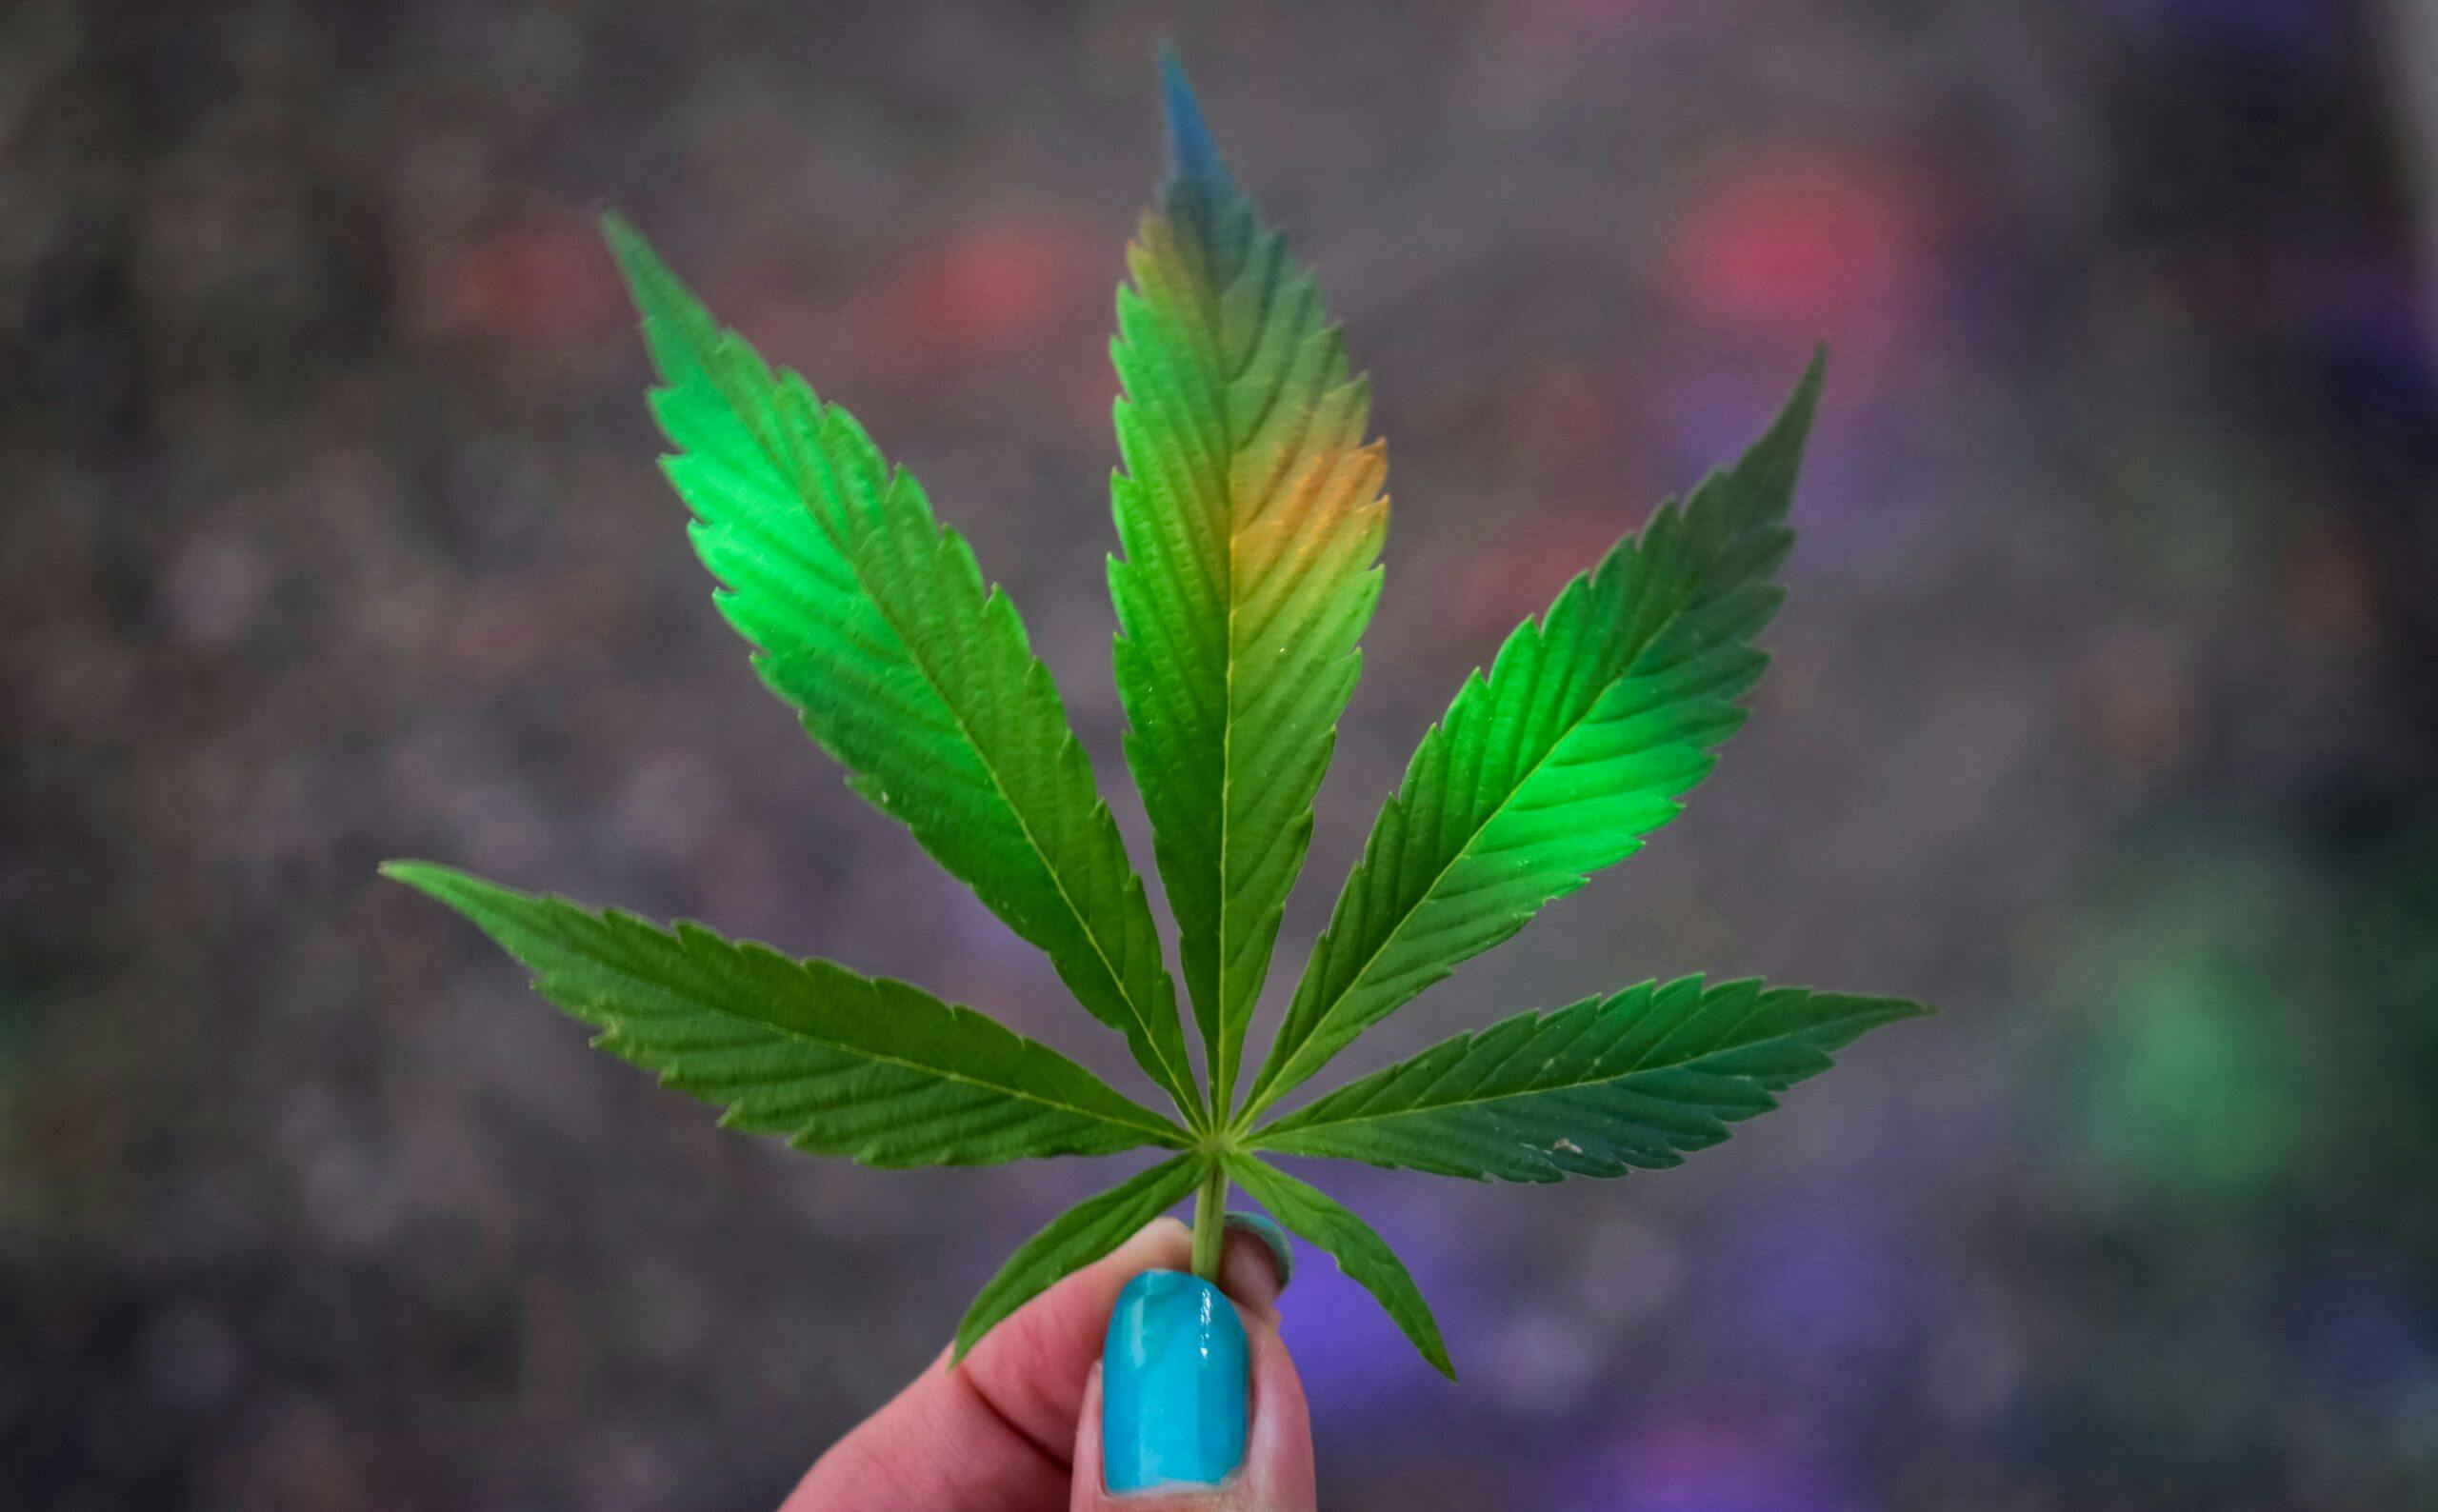 An image of a person's hand holding a cannabis leaf.